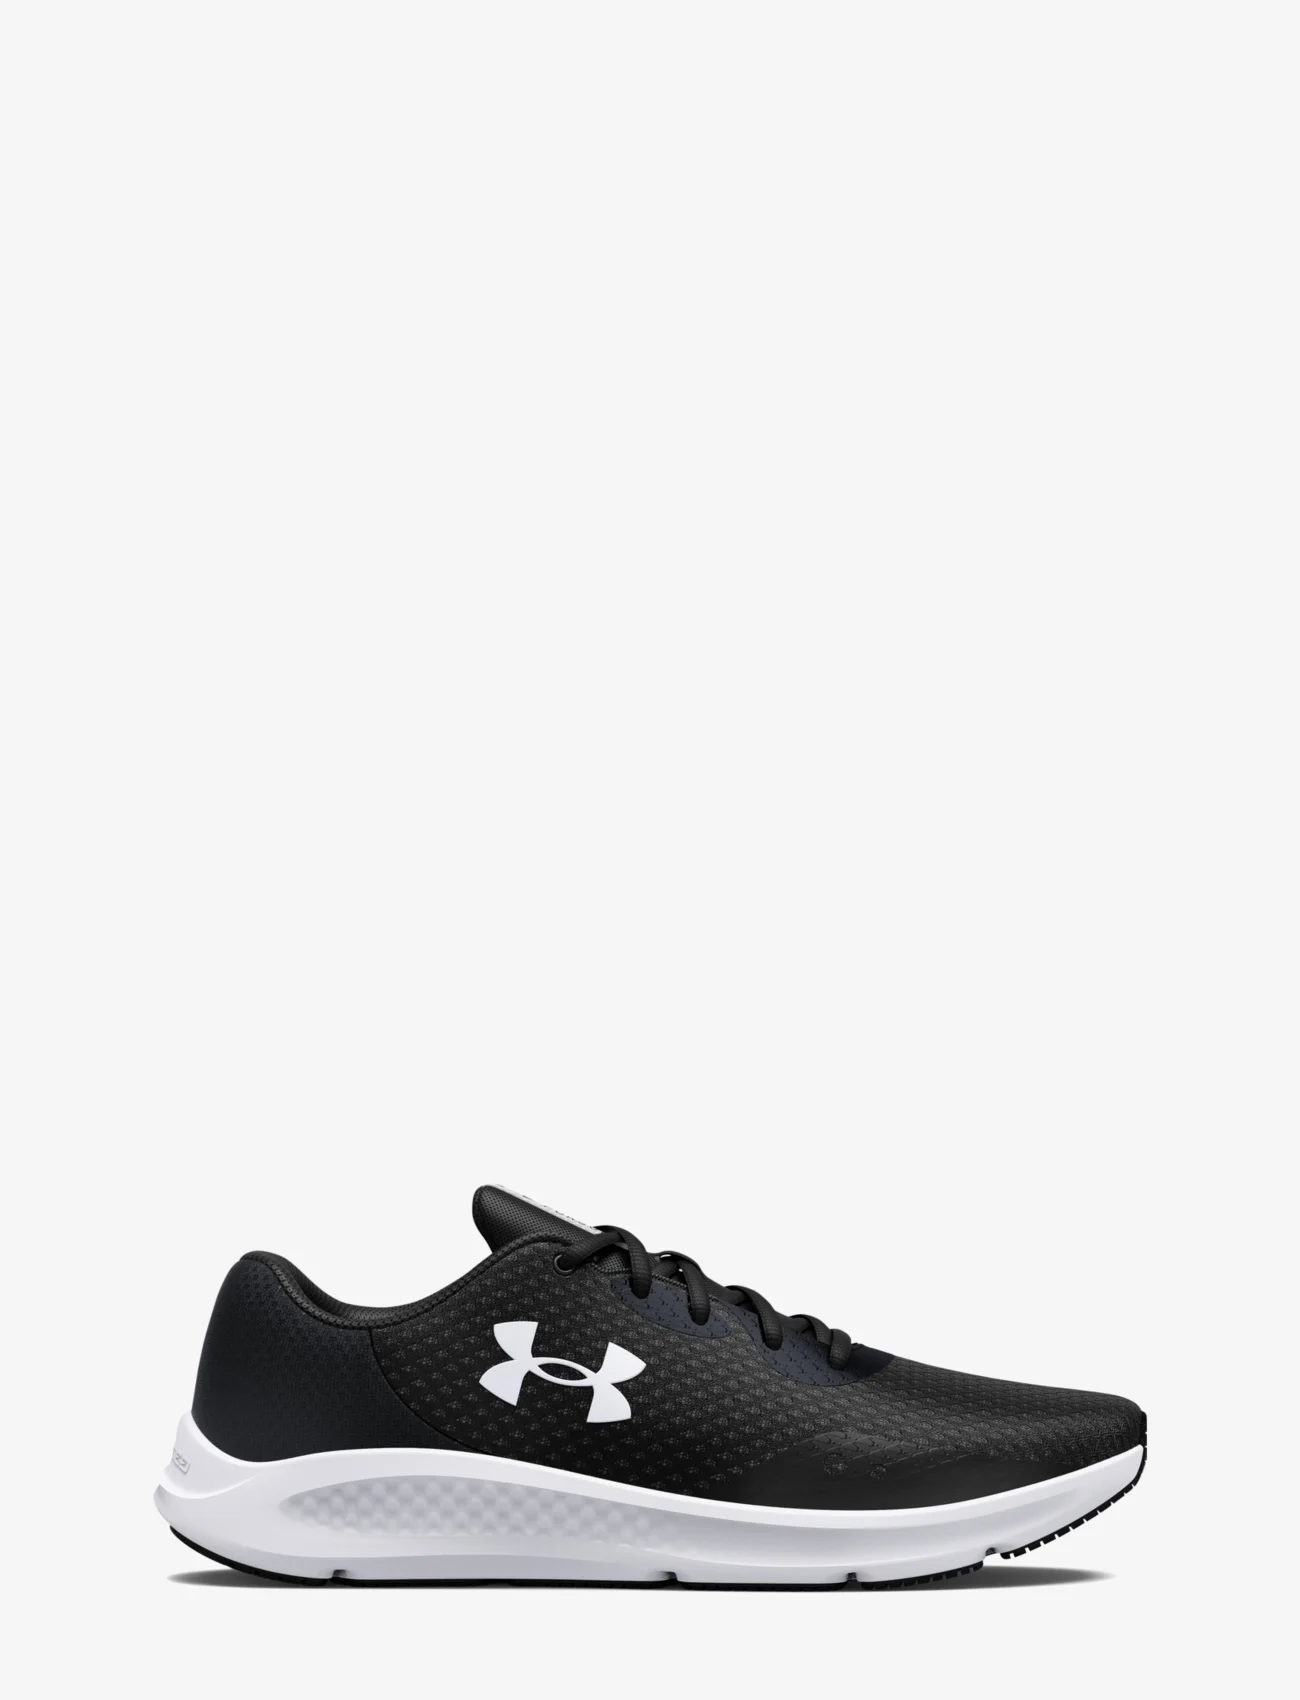 Under Armour - UA Charged Pursuit 3 - running shoes - black - 1